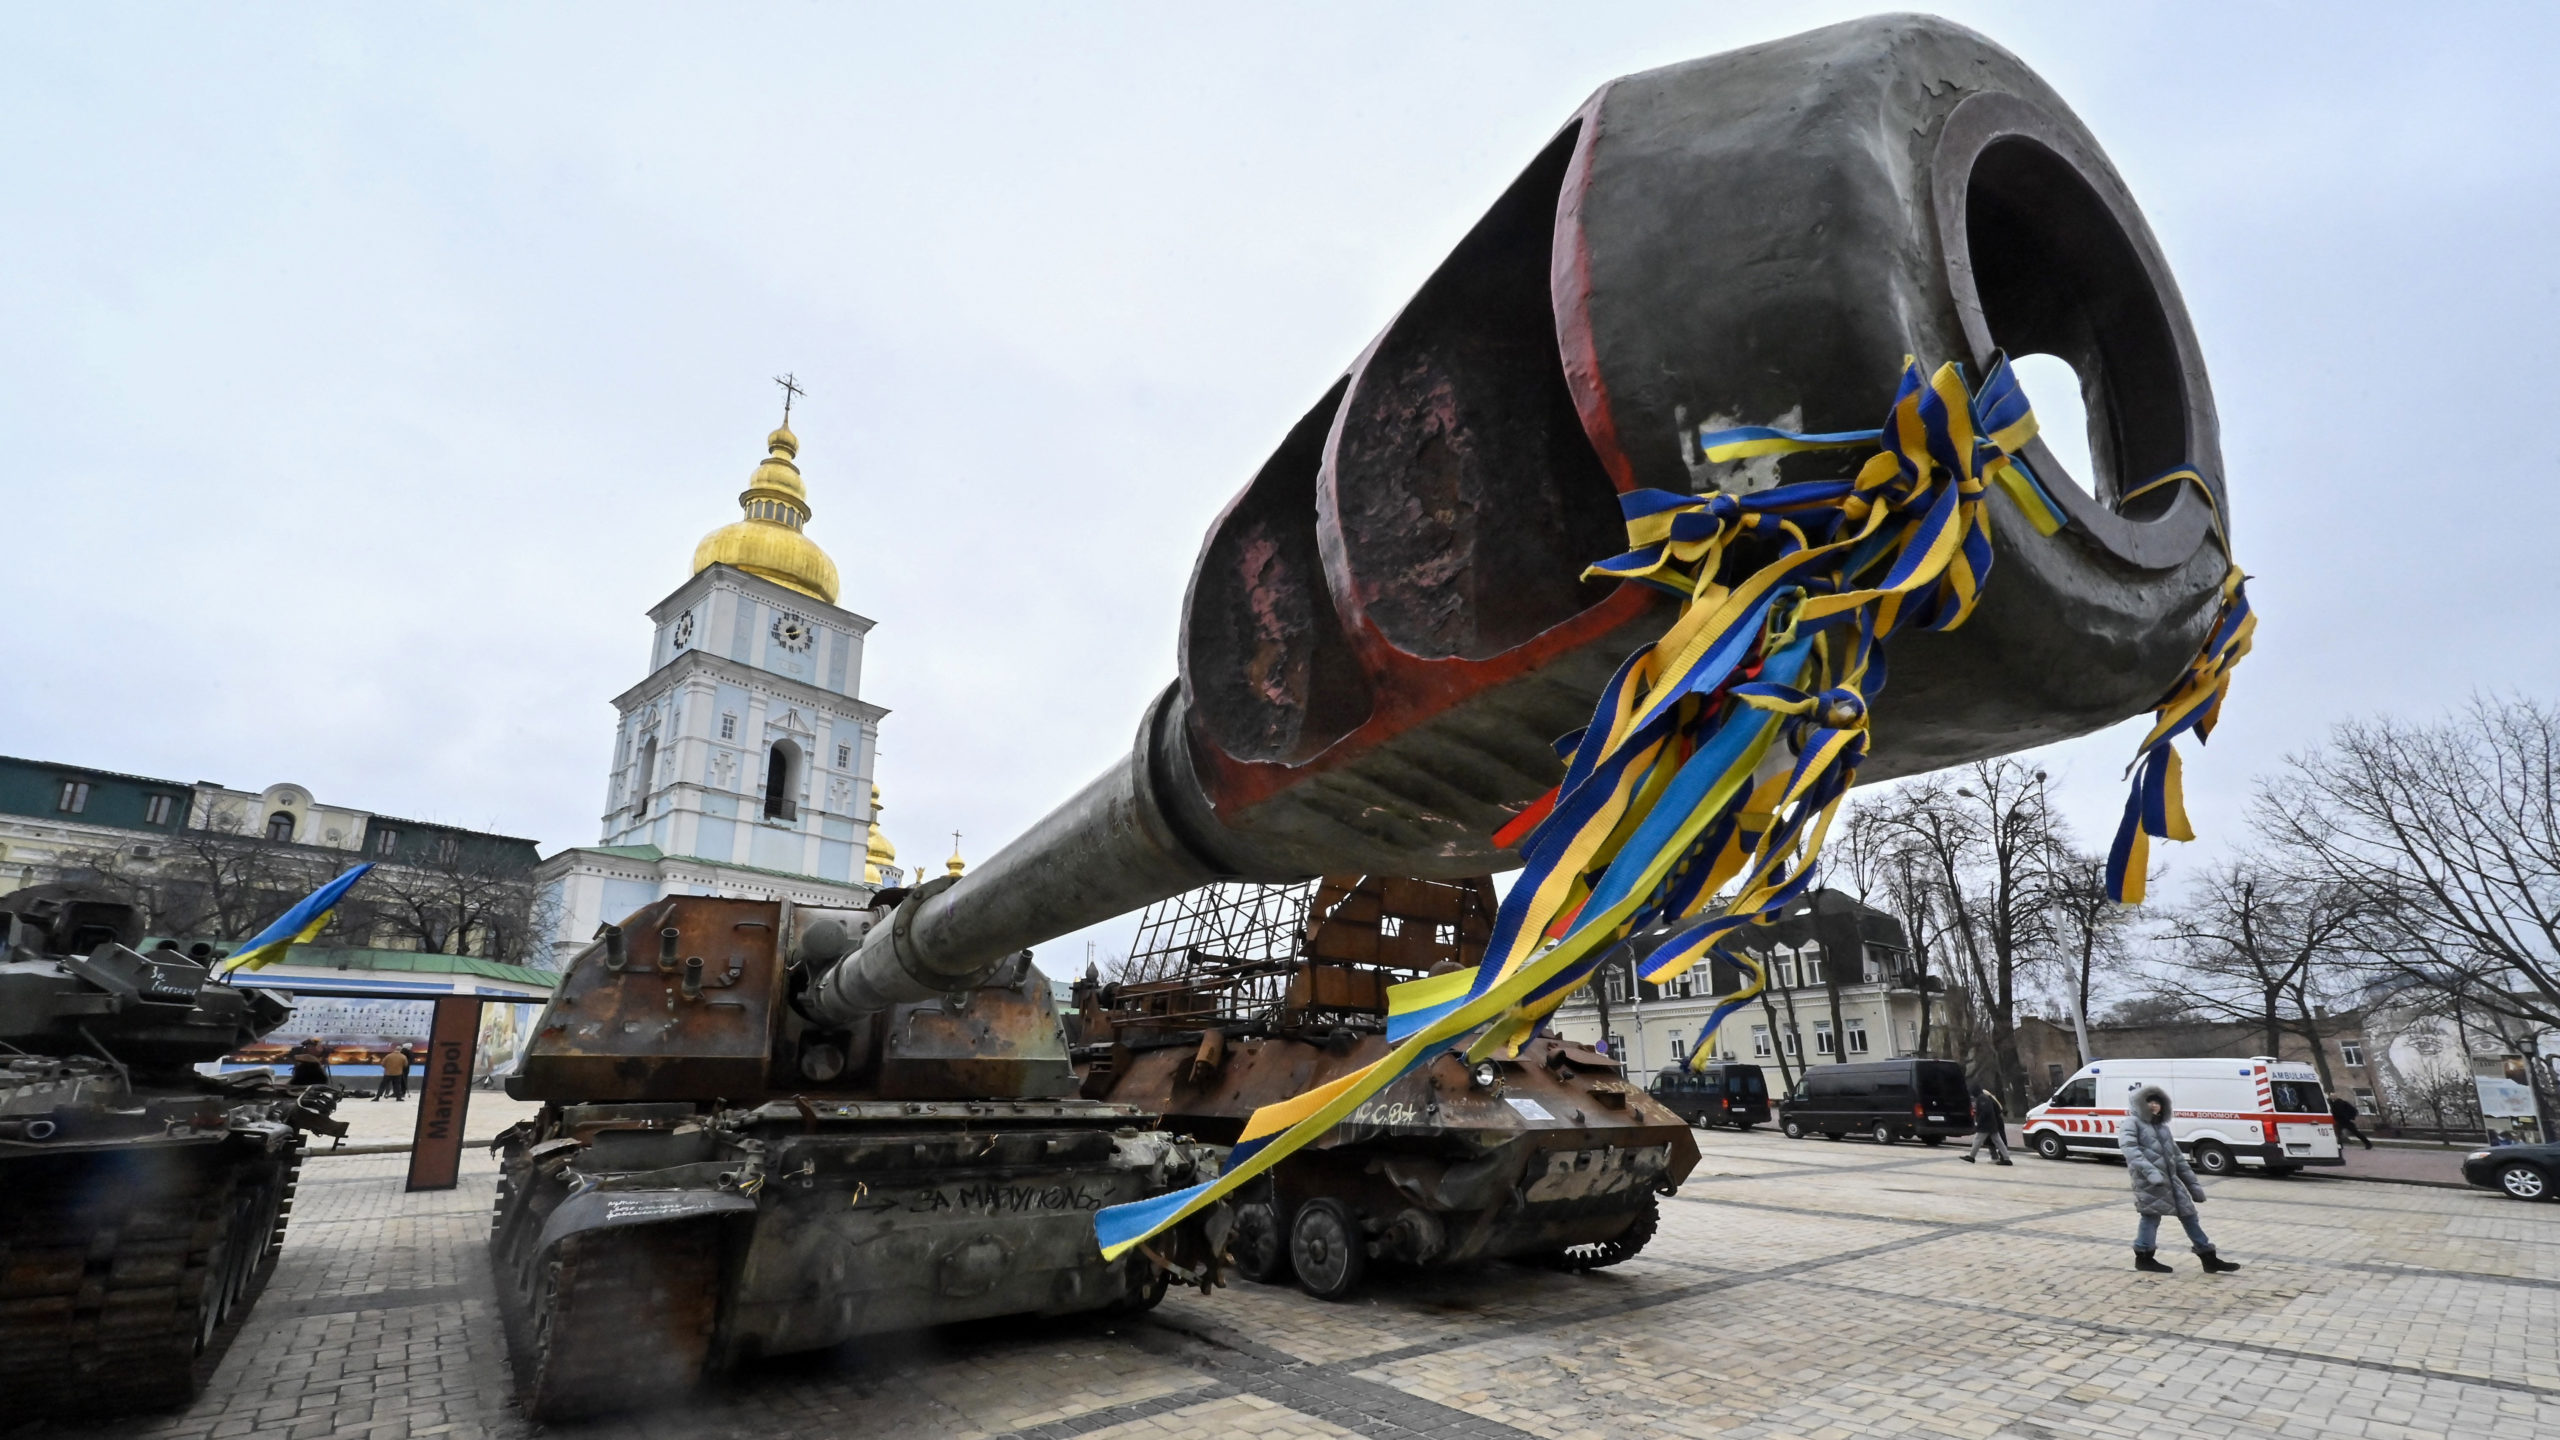 A person walks past destroyed Russian military vehicles displyed in an open air exhibition in Kyiv on February 24, 2023, on the first anniversary of the Russian invasion of Ukraine. (Photo by GENYA SAVILOV / AFP)